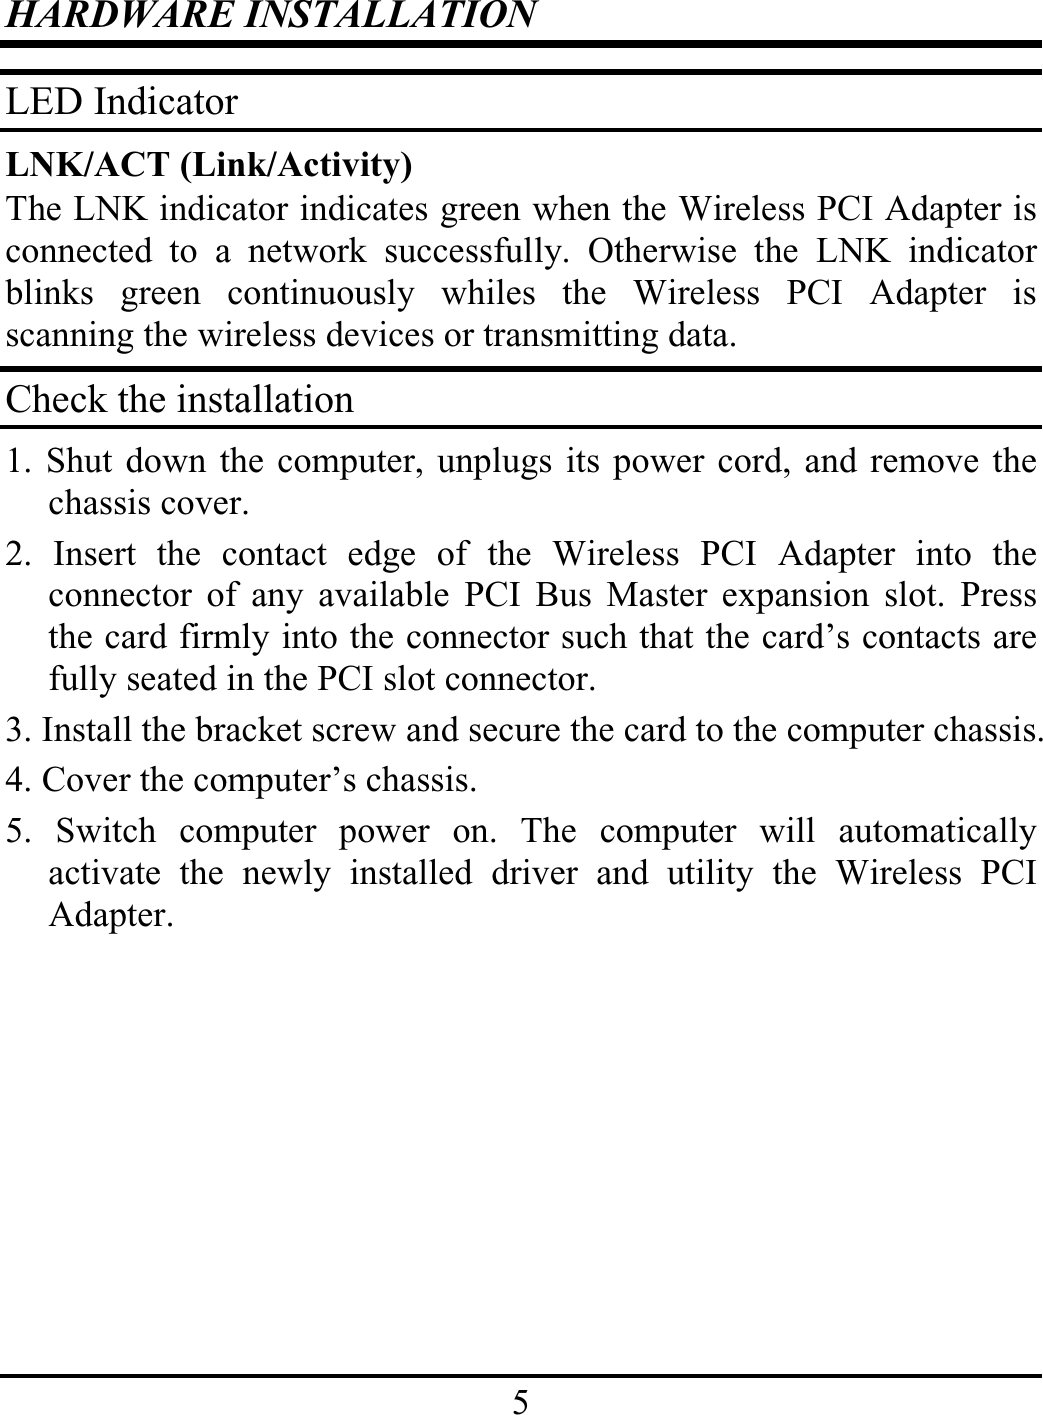 5HARDWARE INSTALLATIONLED IndicatorLNK/ACT (Link/Activity)The LNK indicator indicates green when the Wireless PCI Adapter isconnected to a network successfully. Otherwise the LNK indicatorblinks green continuously whiles the Wireless PCI Adapter isscanning the wireless devices or transmitting data.Check the installation1. Shut down the computer, unplugs its power cord, and remove thechassis cover.2. Insert the contact edge of the Wireless PCI Adapter into theconnector of any available PCI Bus Master expansion slot. Pressthe card firmly into the connector such that the card’s contacts arefully seated in the PCI slot connector.3. Install the bracket screw and secure the card to the computer chassis.4. Cover the computer’s chassis.5. Switch computer power on. The computer will automaticallyactivate the newly installed driver and utility the Wireless PCIAdapter.